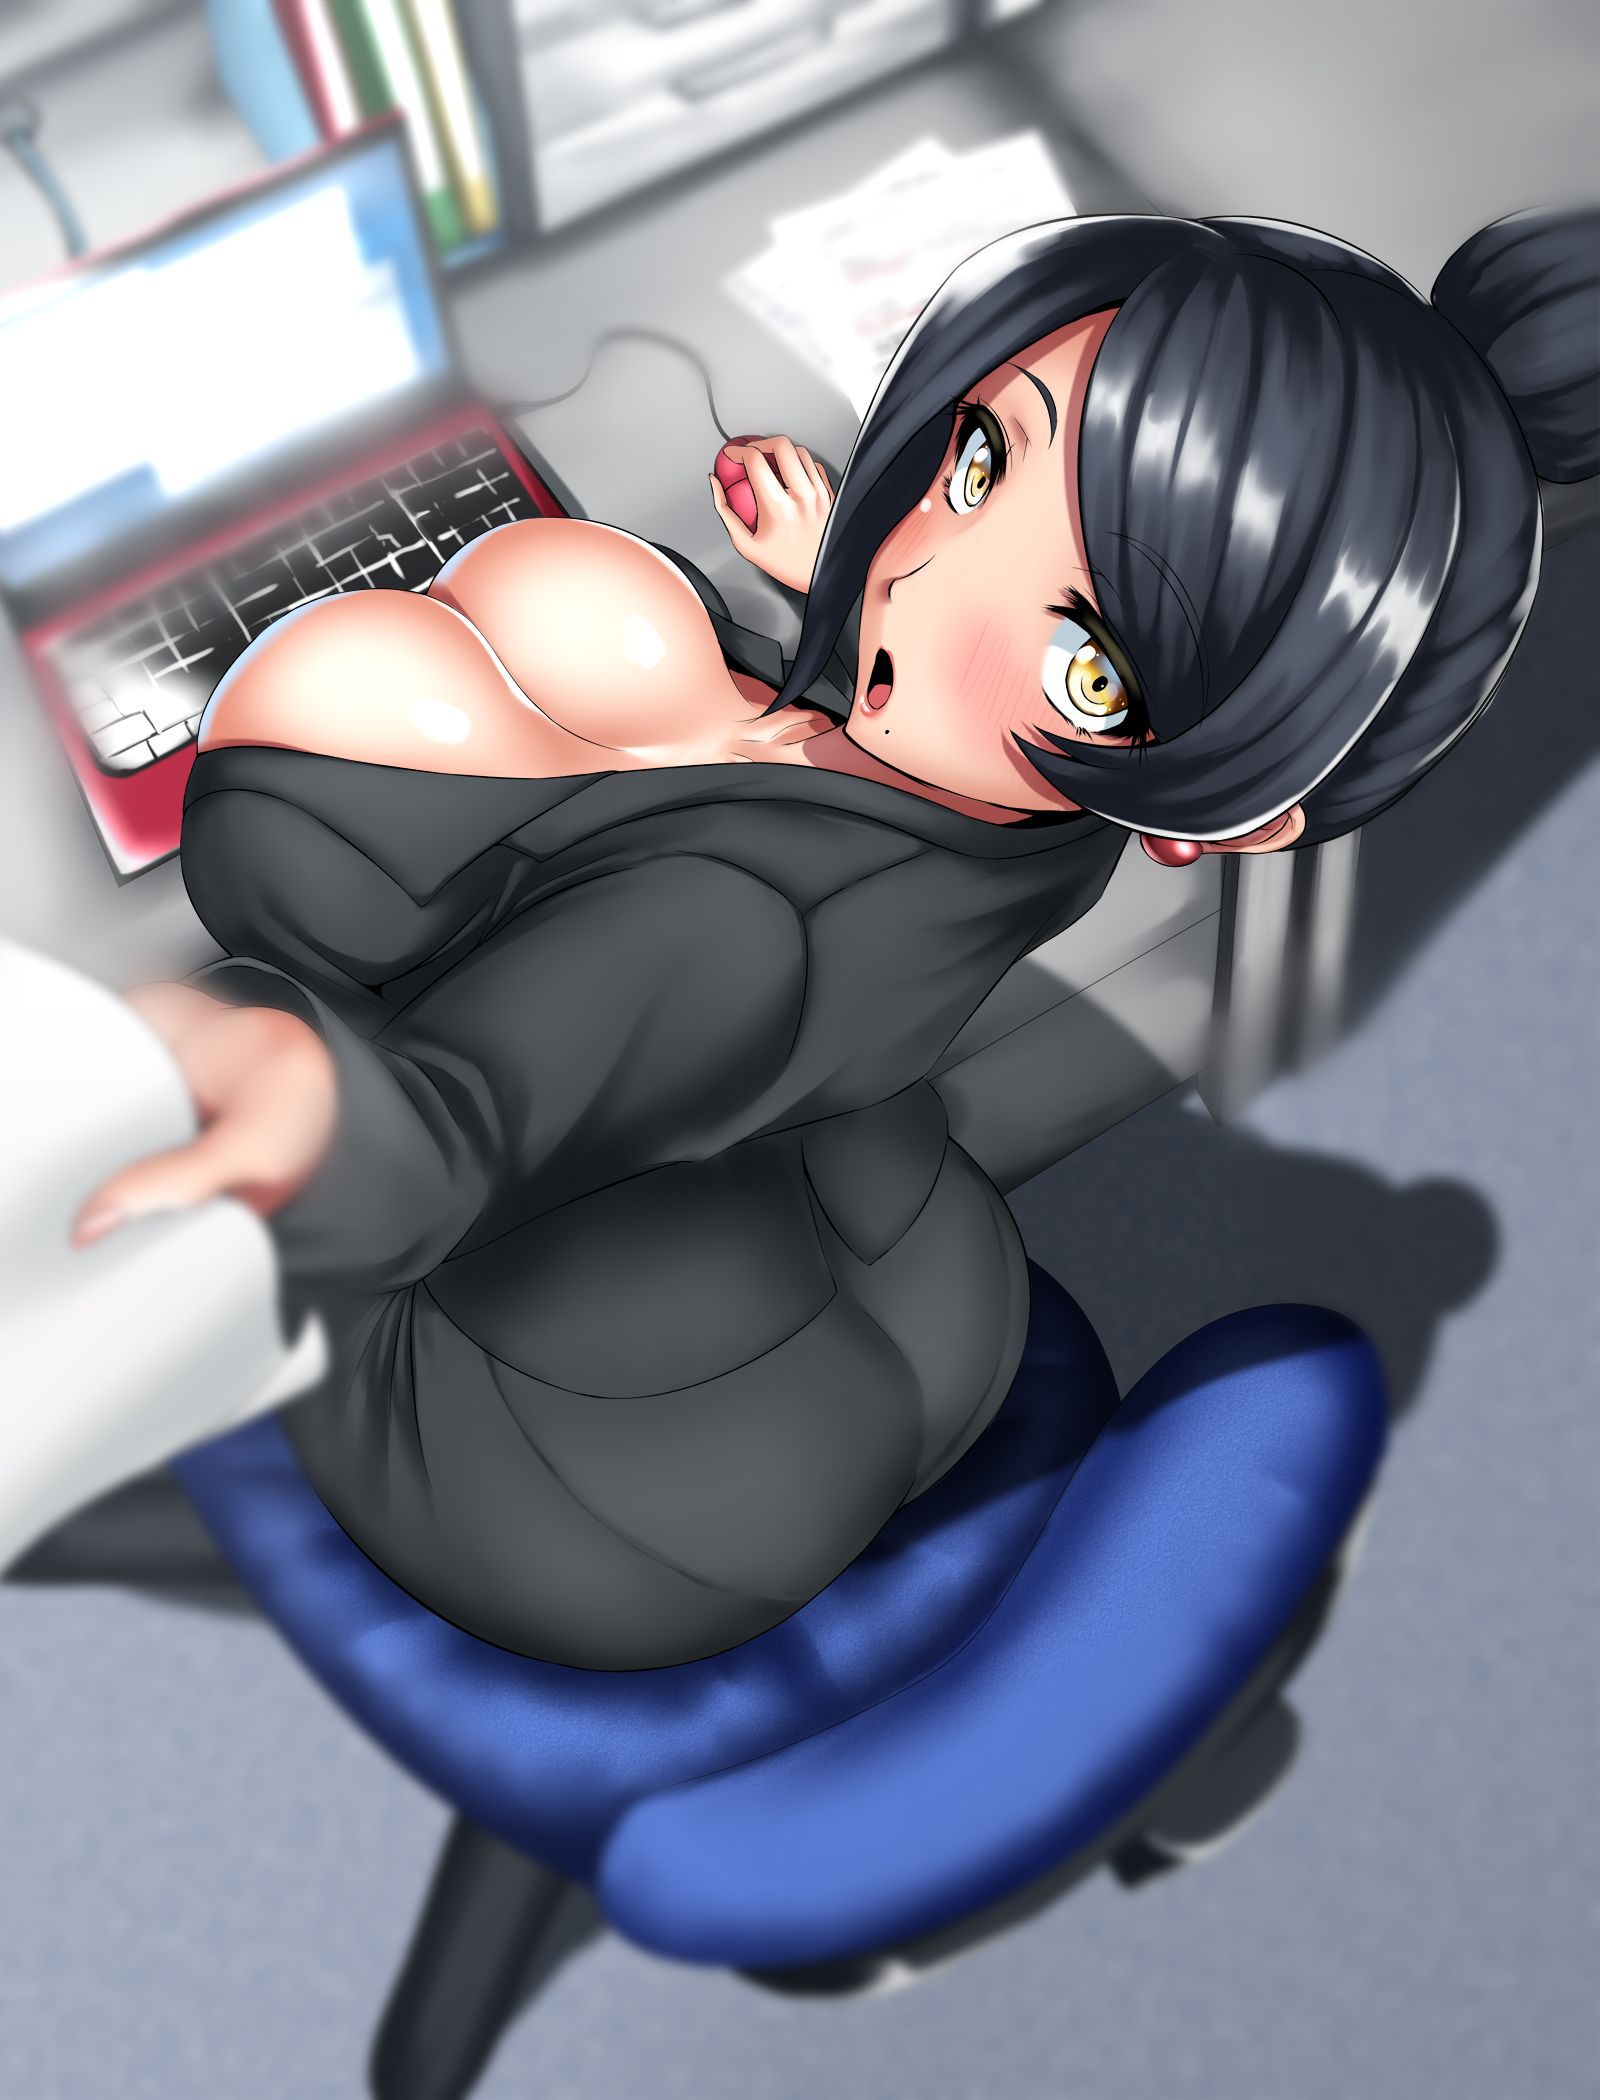 【Secondary Erotic】 Here is an erotic image of a girl wearing a tight costume so tight that you can see the panty line 30